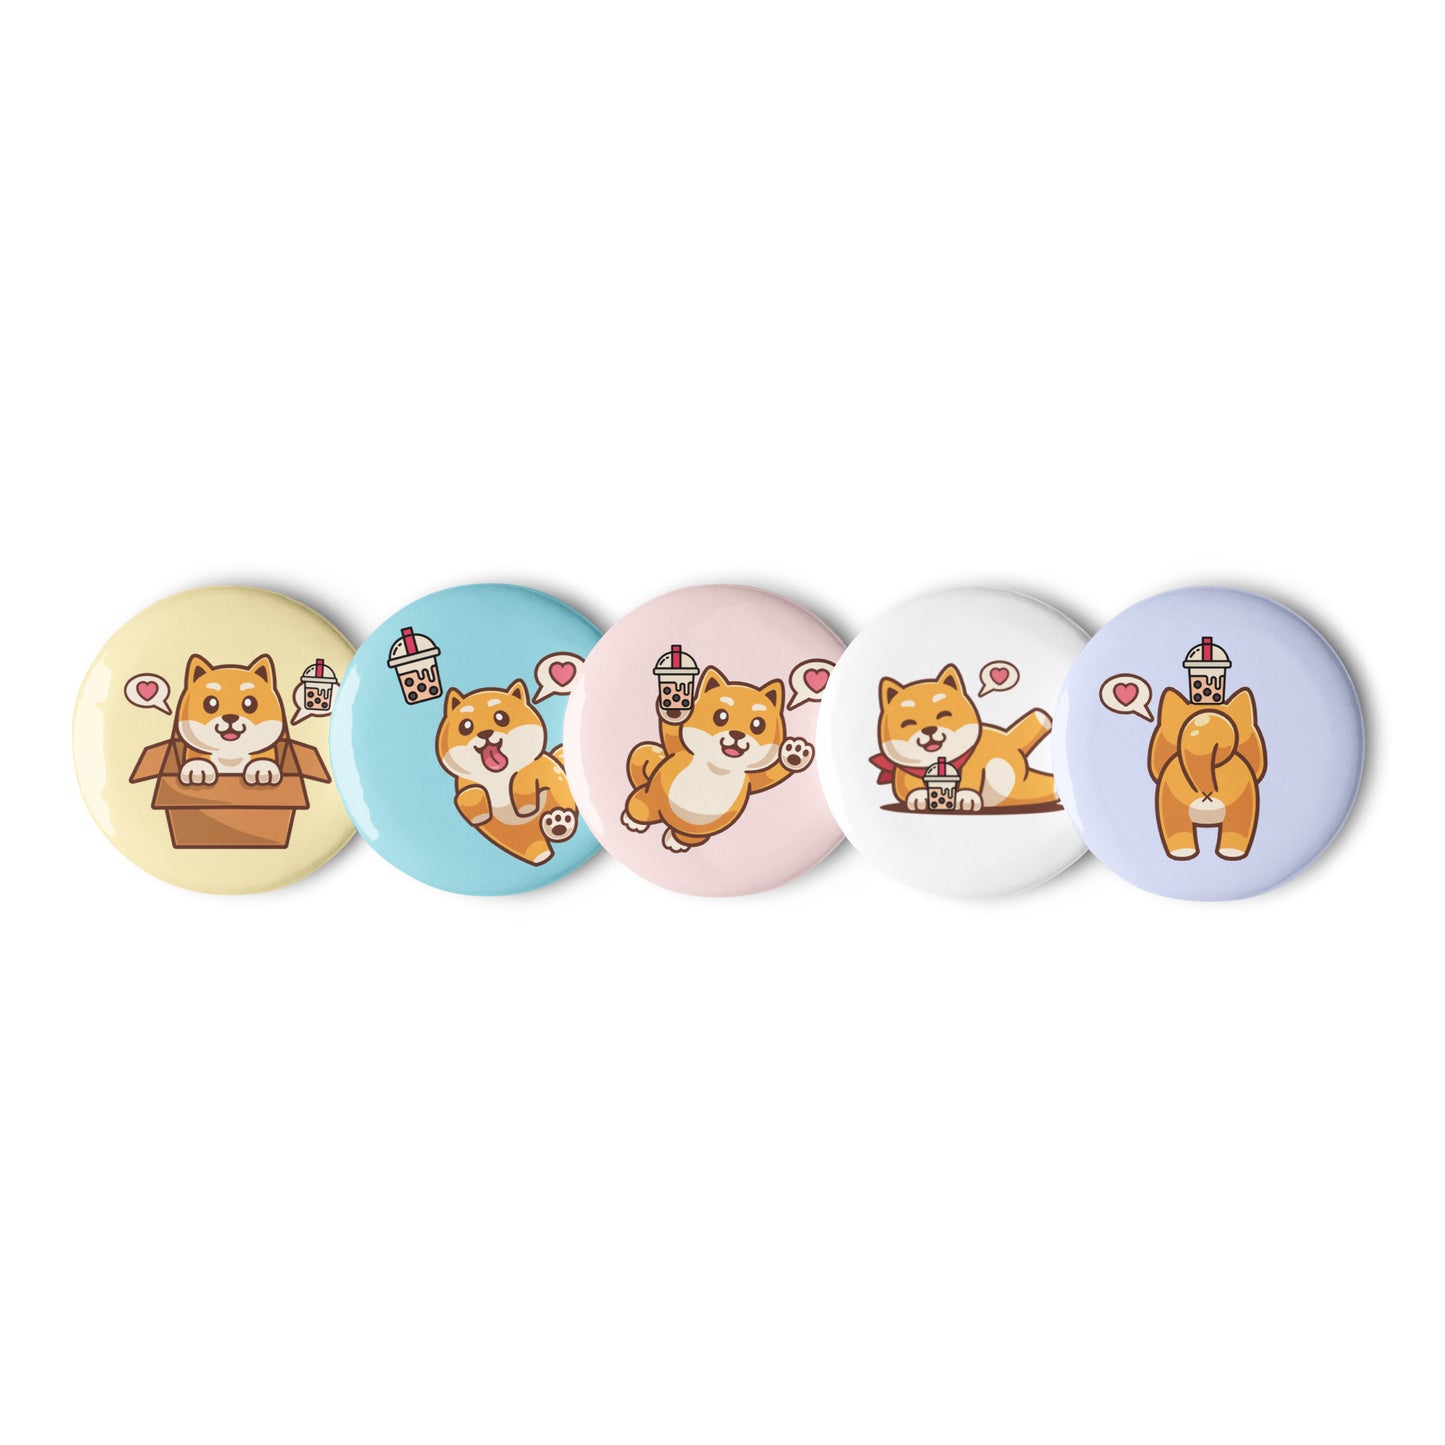 Cute Puppies Set of 5 pin buttons